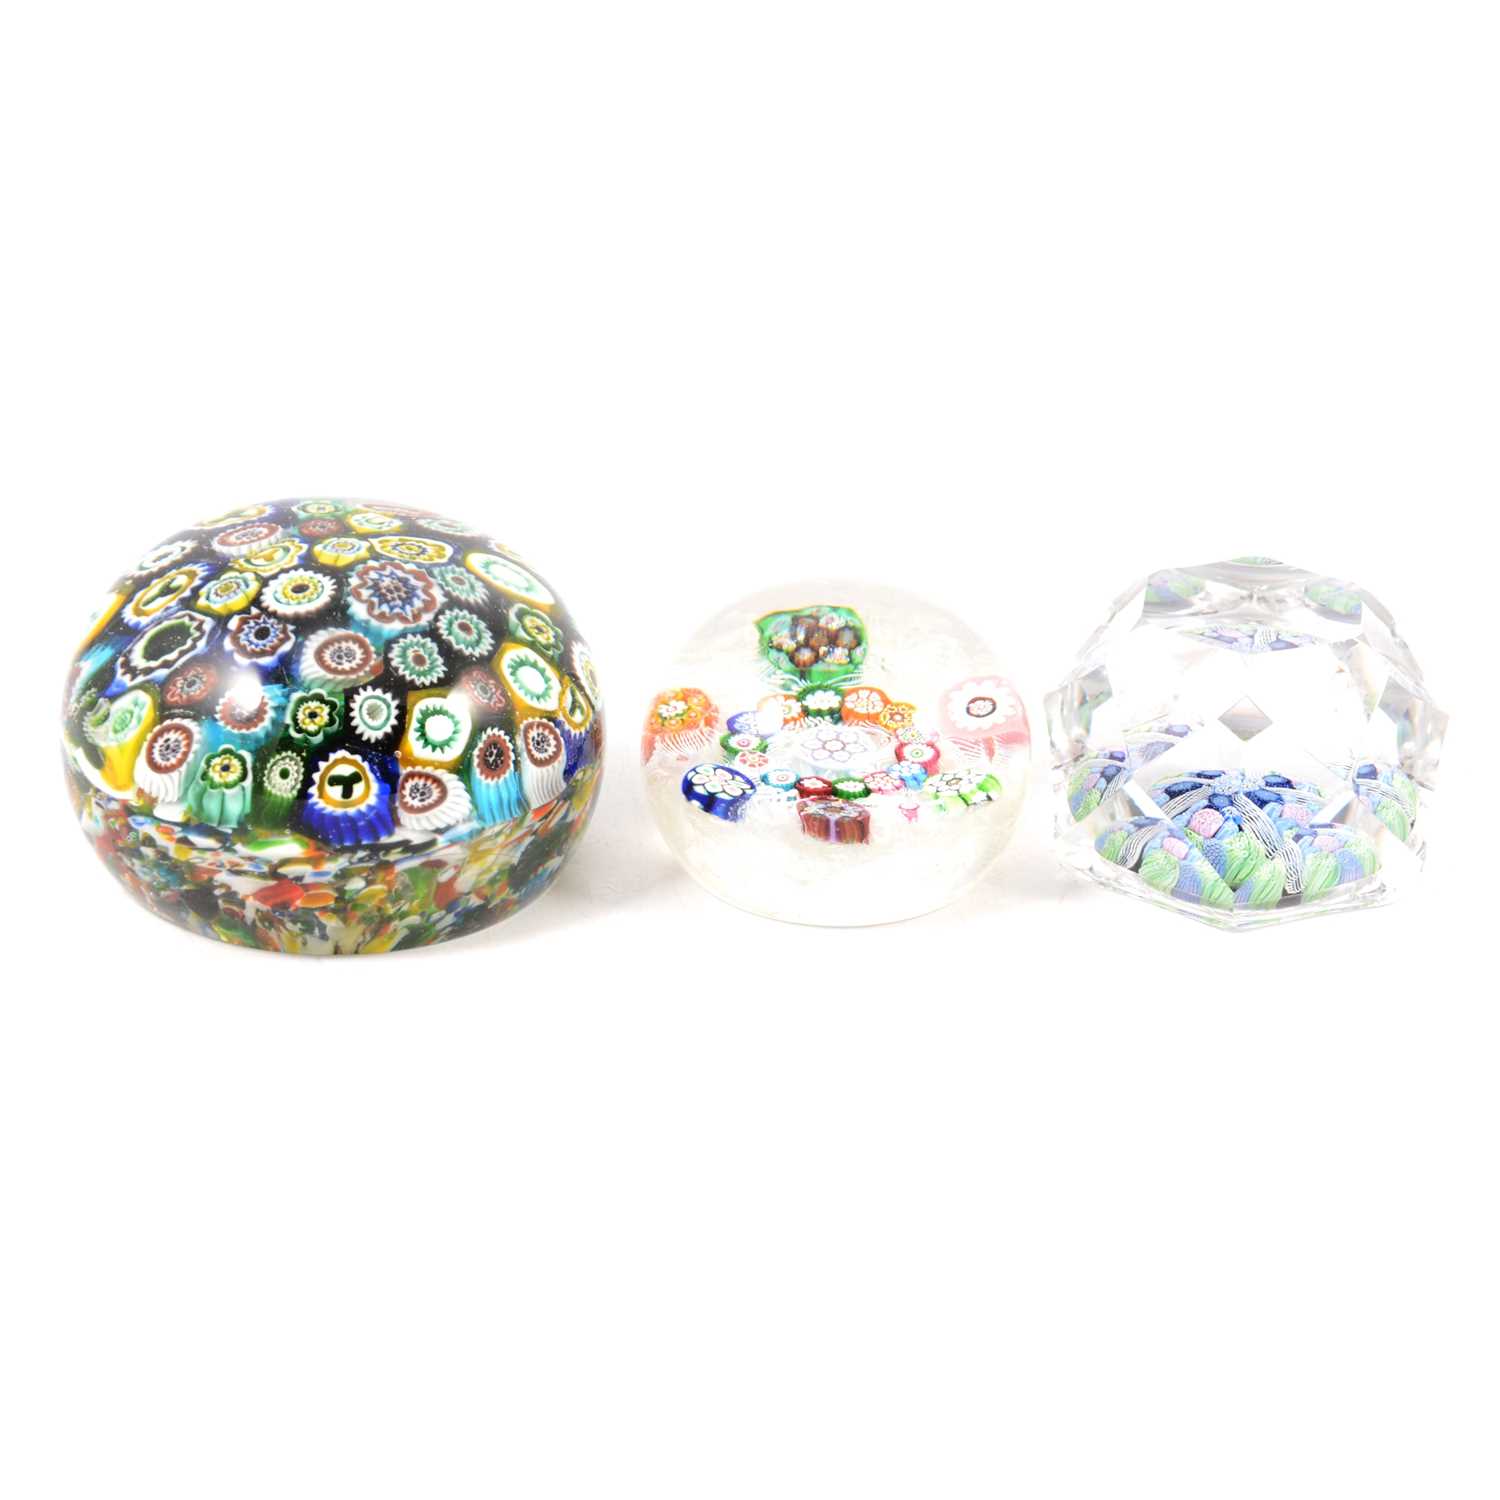 Lot 72 - Paul Ysart Harland, Whitefriars and another millefiori glass paperweight.